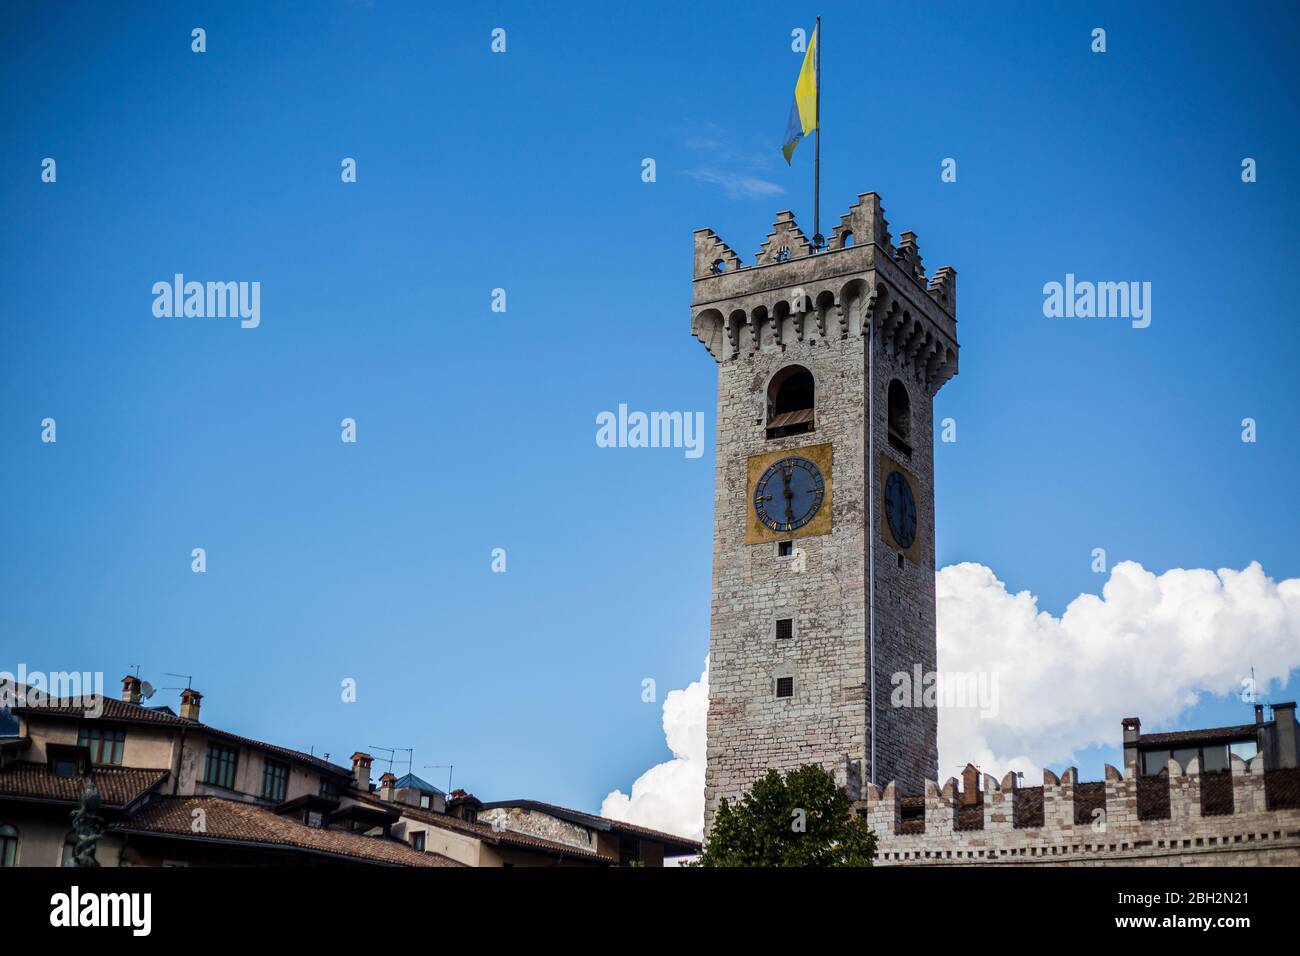 Trento, Italy - August 19, 2019: View of Trento Clock Tower (Torre Civica) in the Old Town Stock Photo